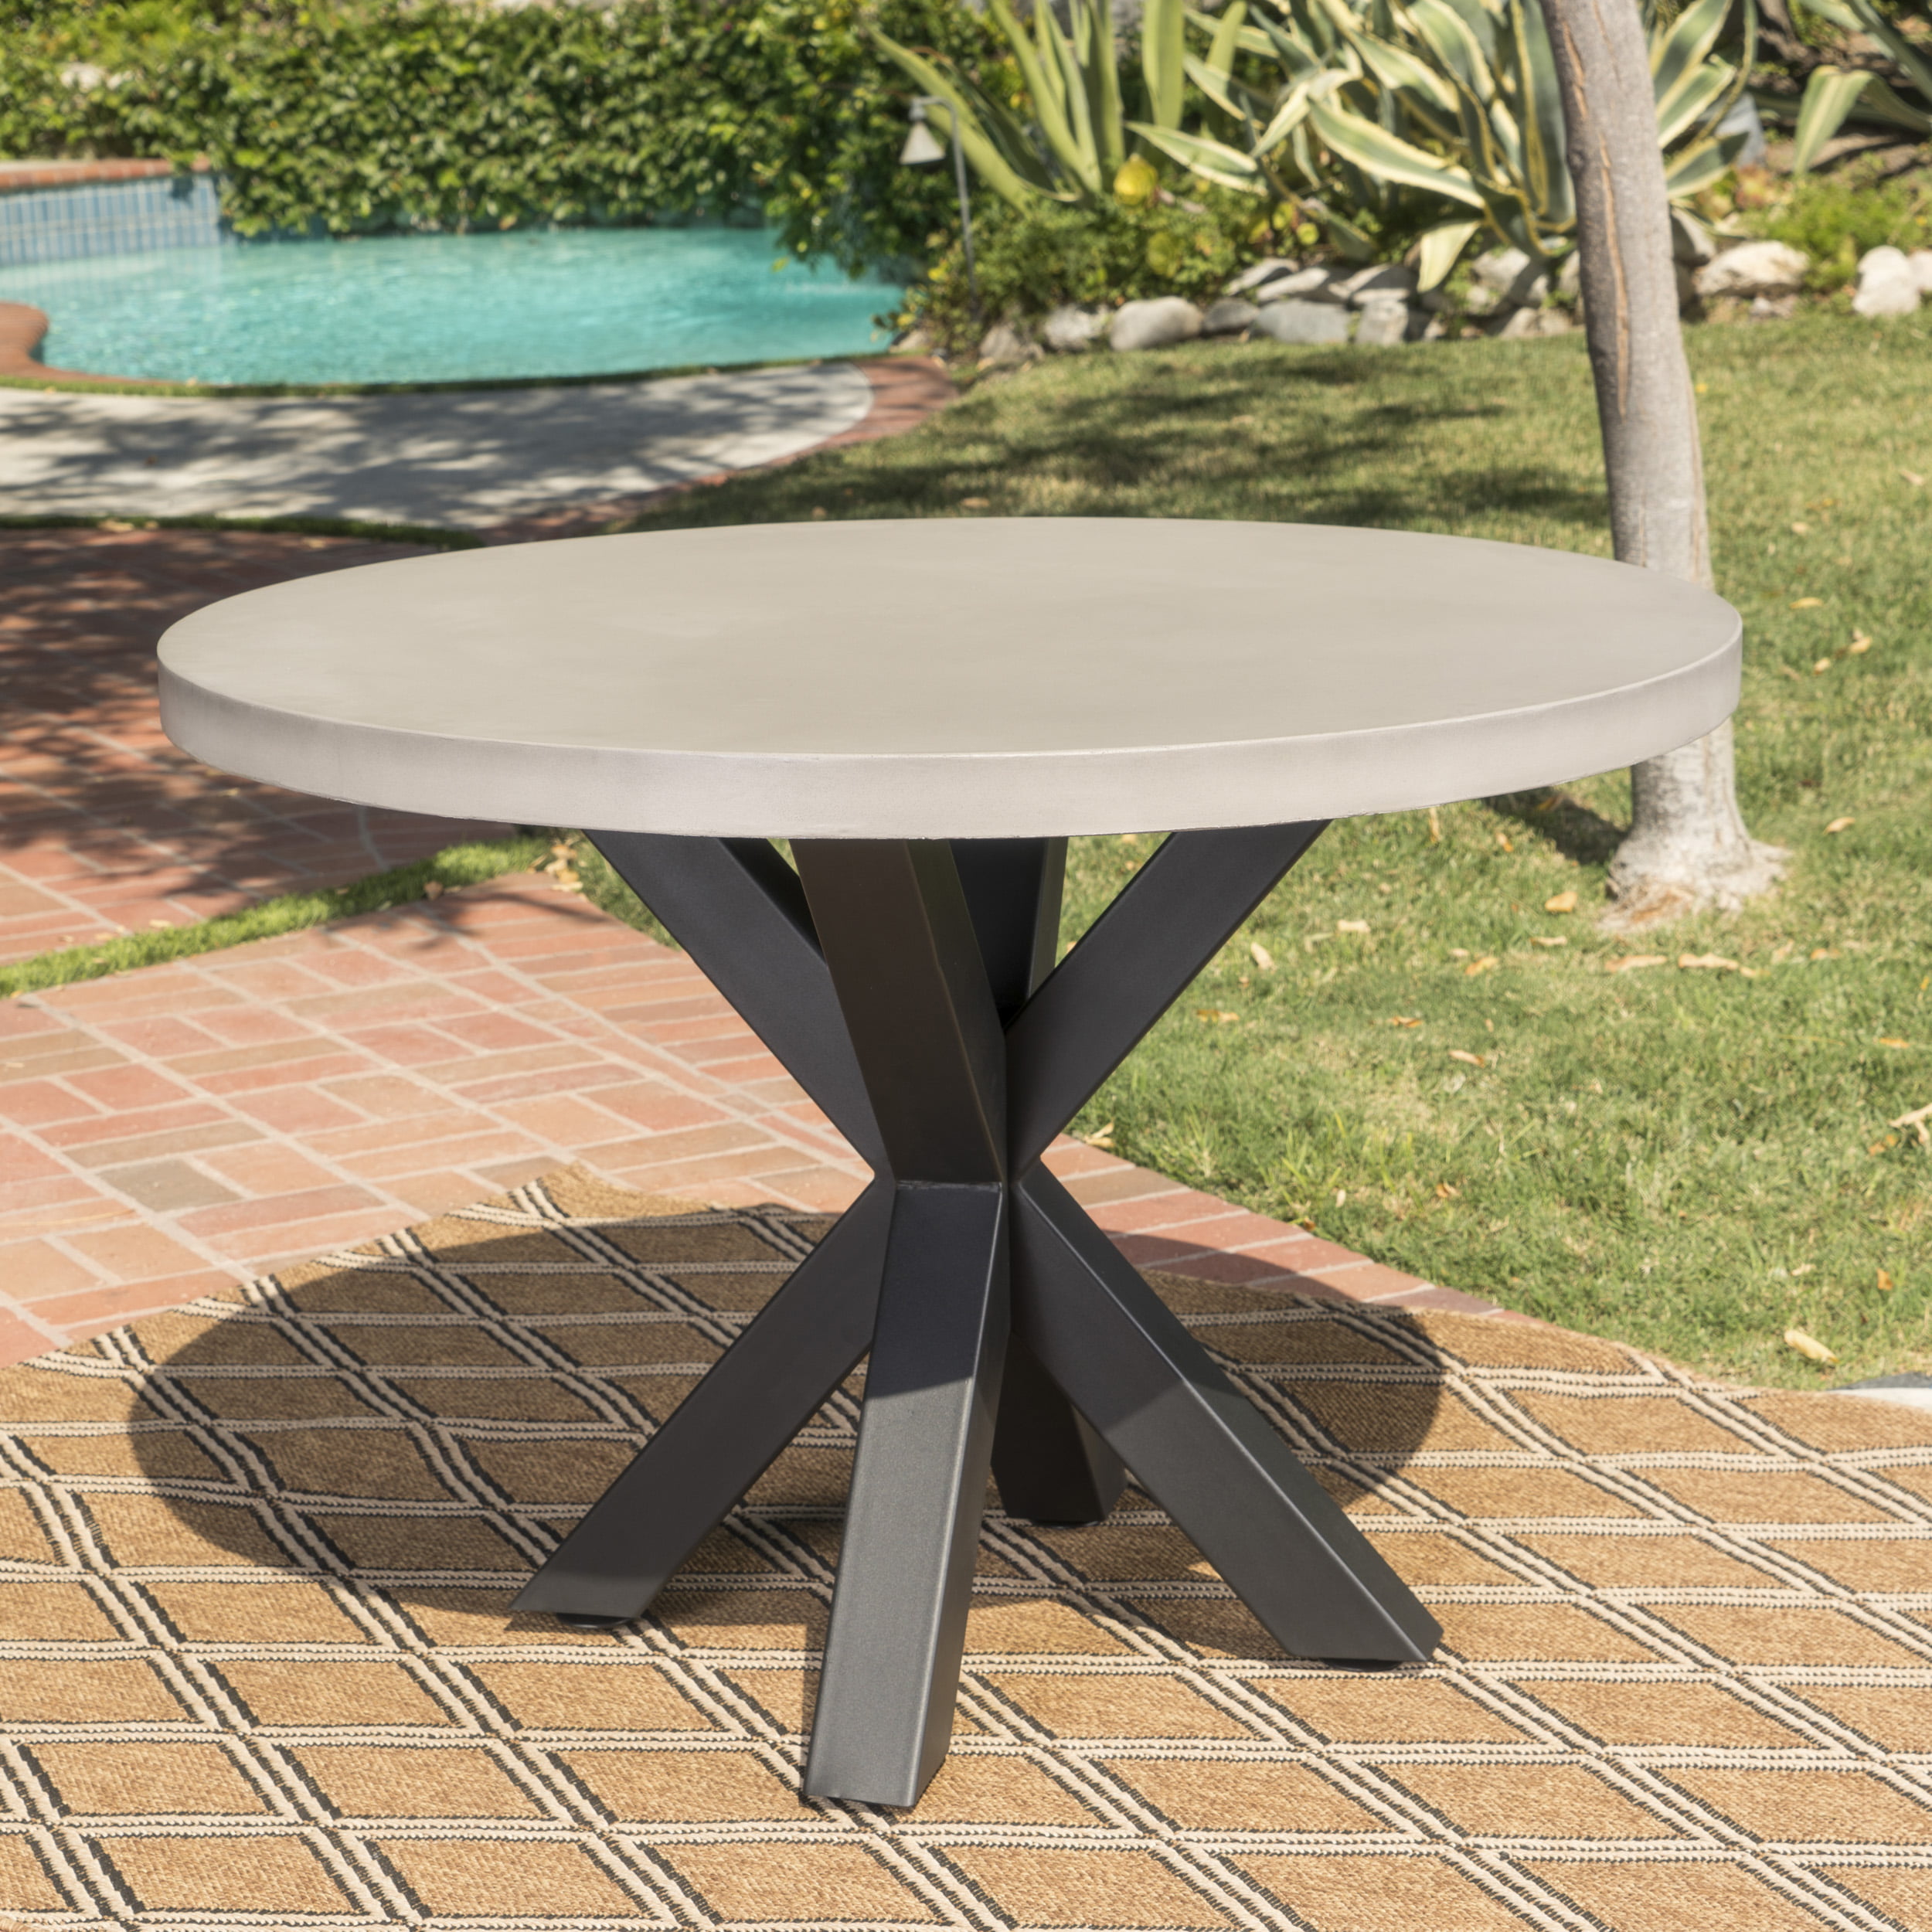 Carina Outdoor Modern Lightweight Concrete Circular Dining Table with